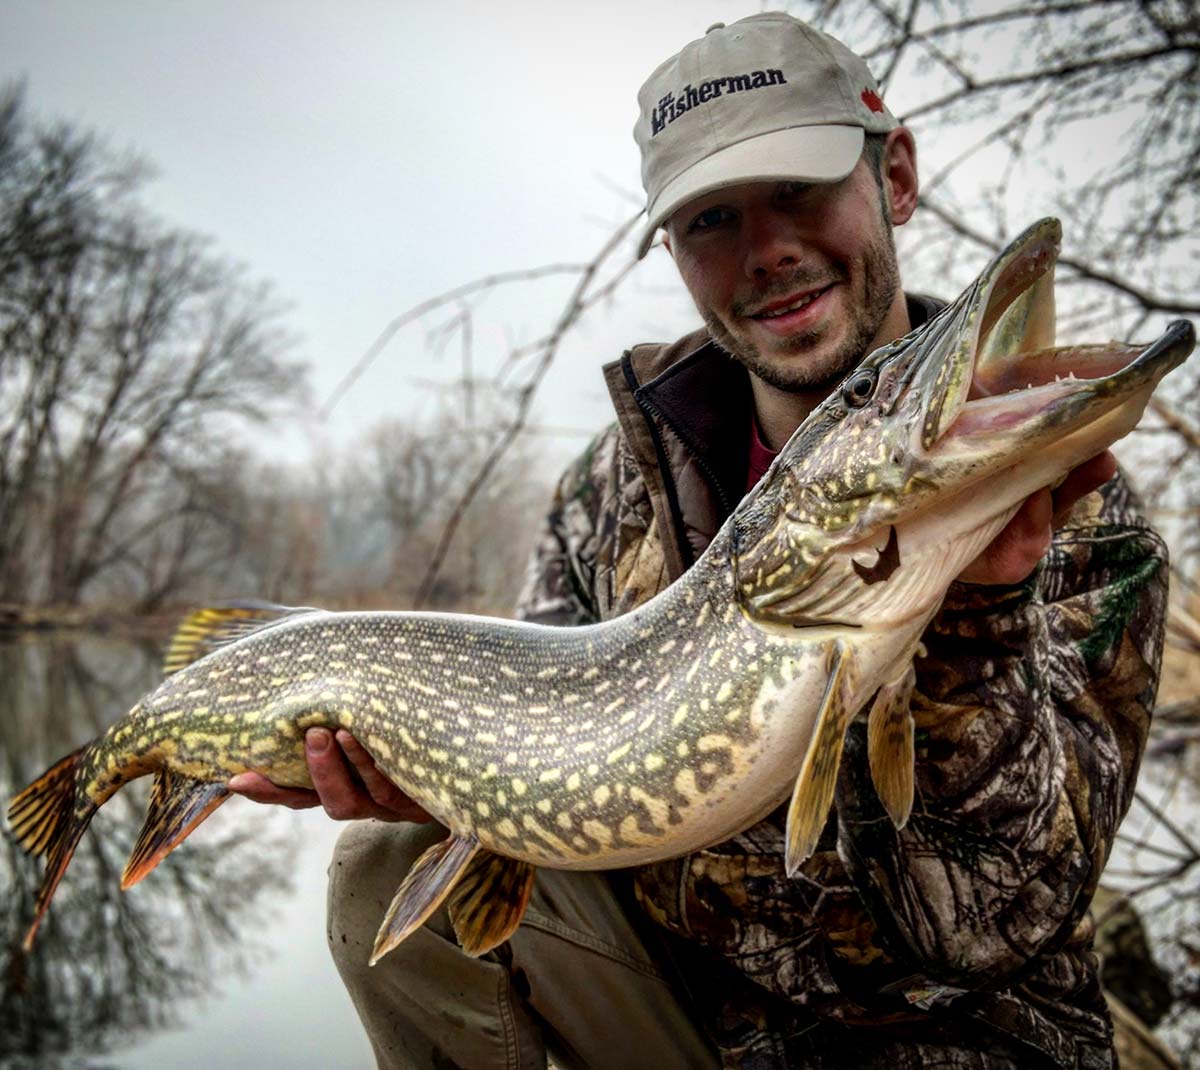 Late season PIKE! Who doesn't love when you can catch fish and a